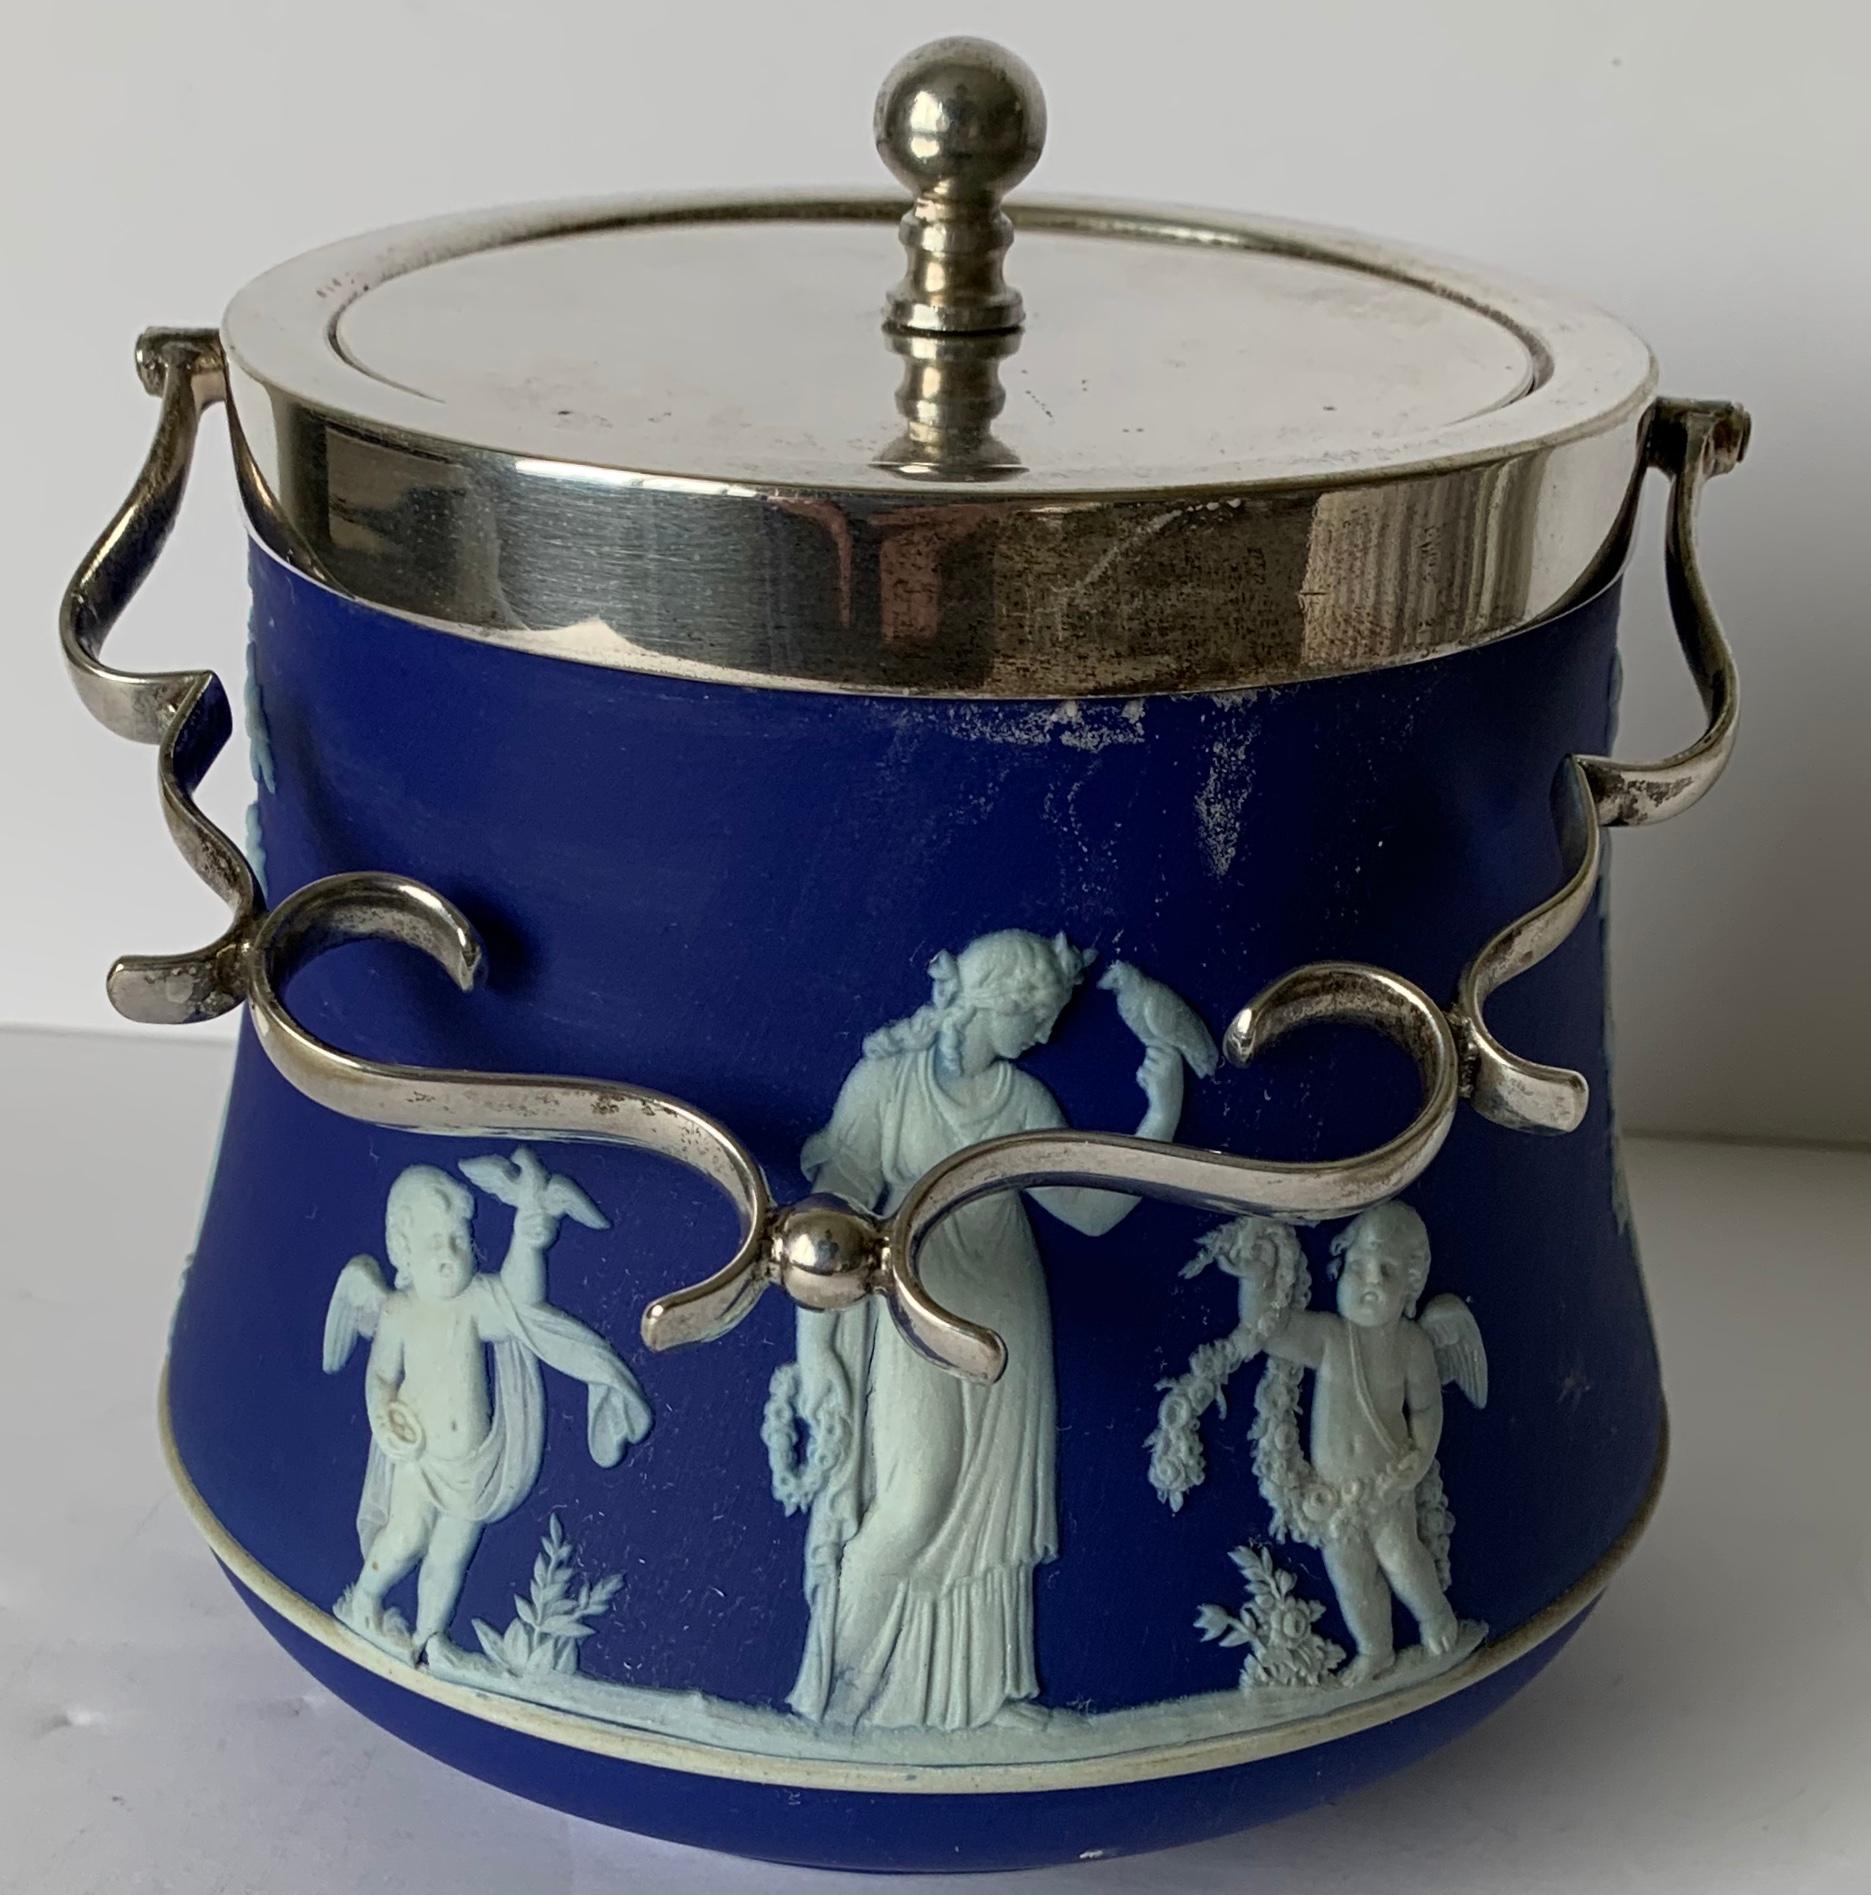 Wedgwood dark blue bell shaped jasperware biscuit barrel overall neoclassical motif with a silver plated lid and handle. Stamped Wedgwood on the underside and lid is marked.